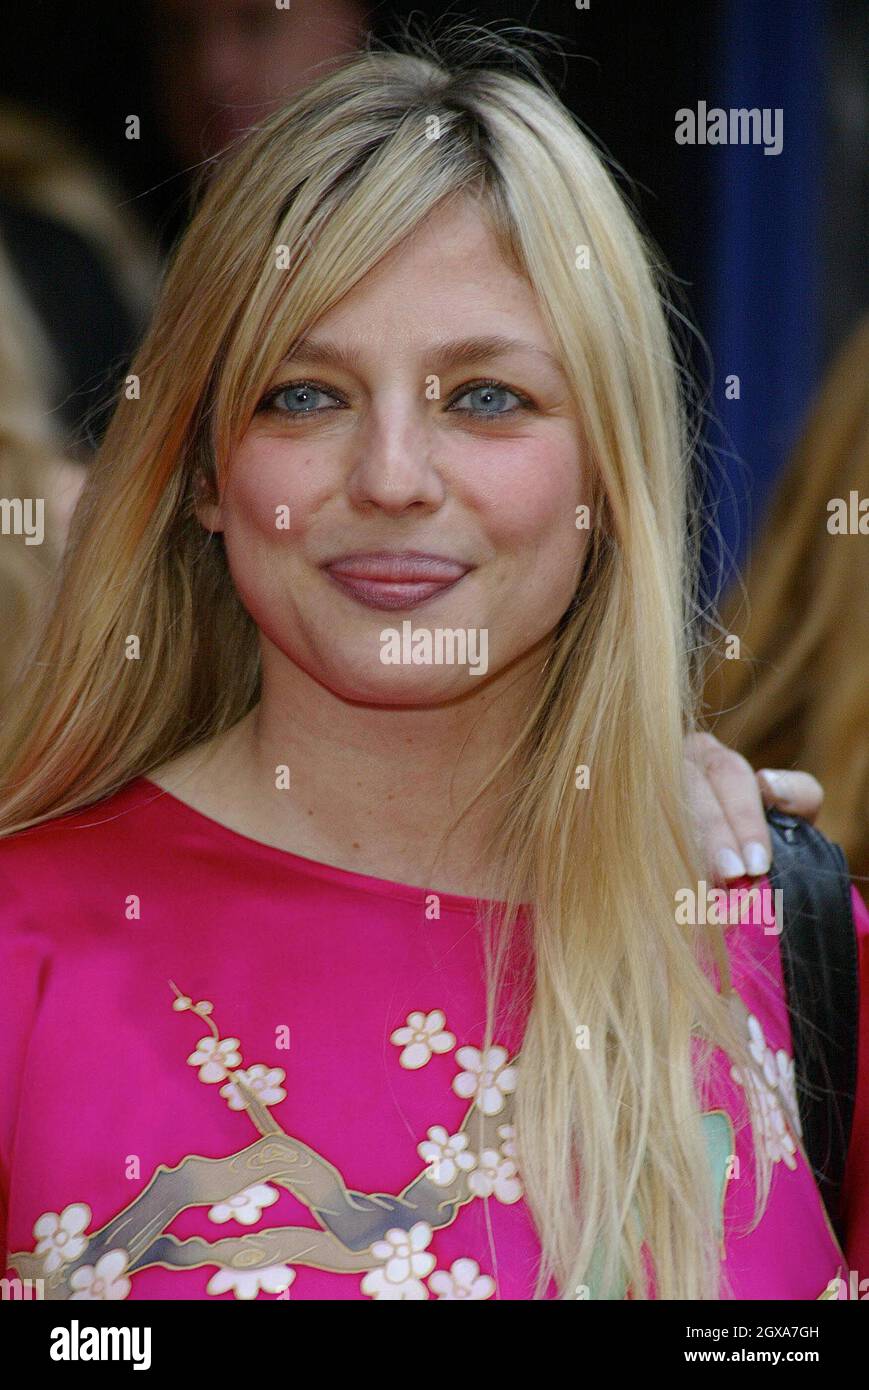 Susie Mizzi at the arrivals for the world premiere of the film The Football Factory.  Stock Photo